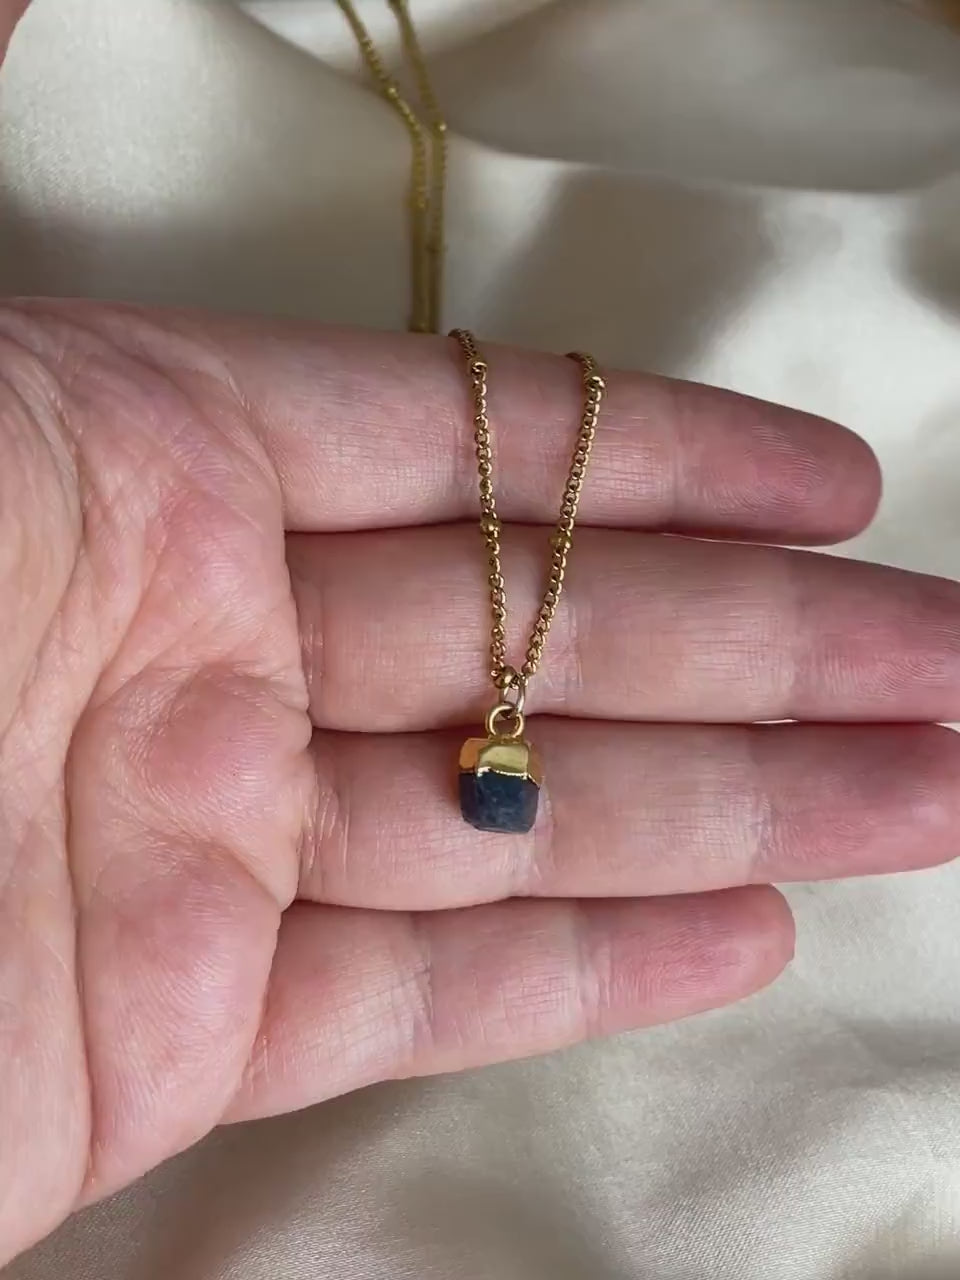 Small Raw Sapphire Satellite Chain Necklace, 18K Gold Stainless Steel, September Birthstone Gift, G15-146